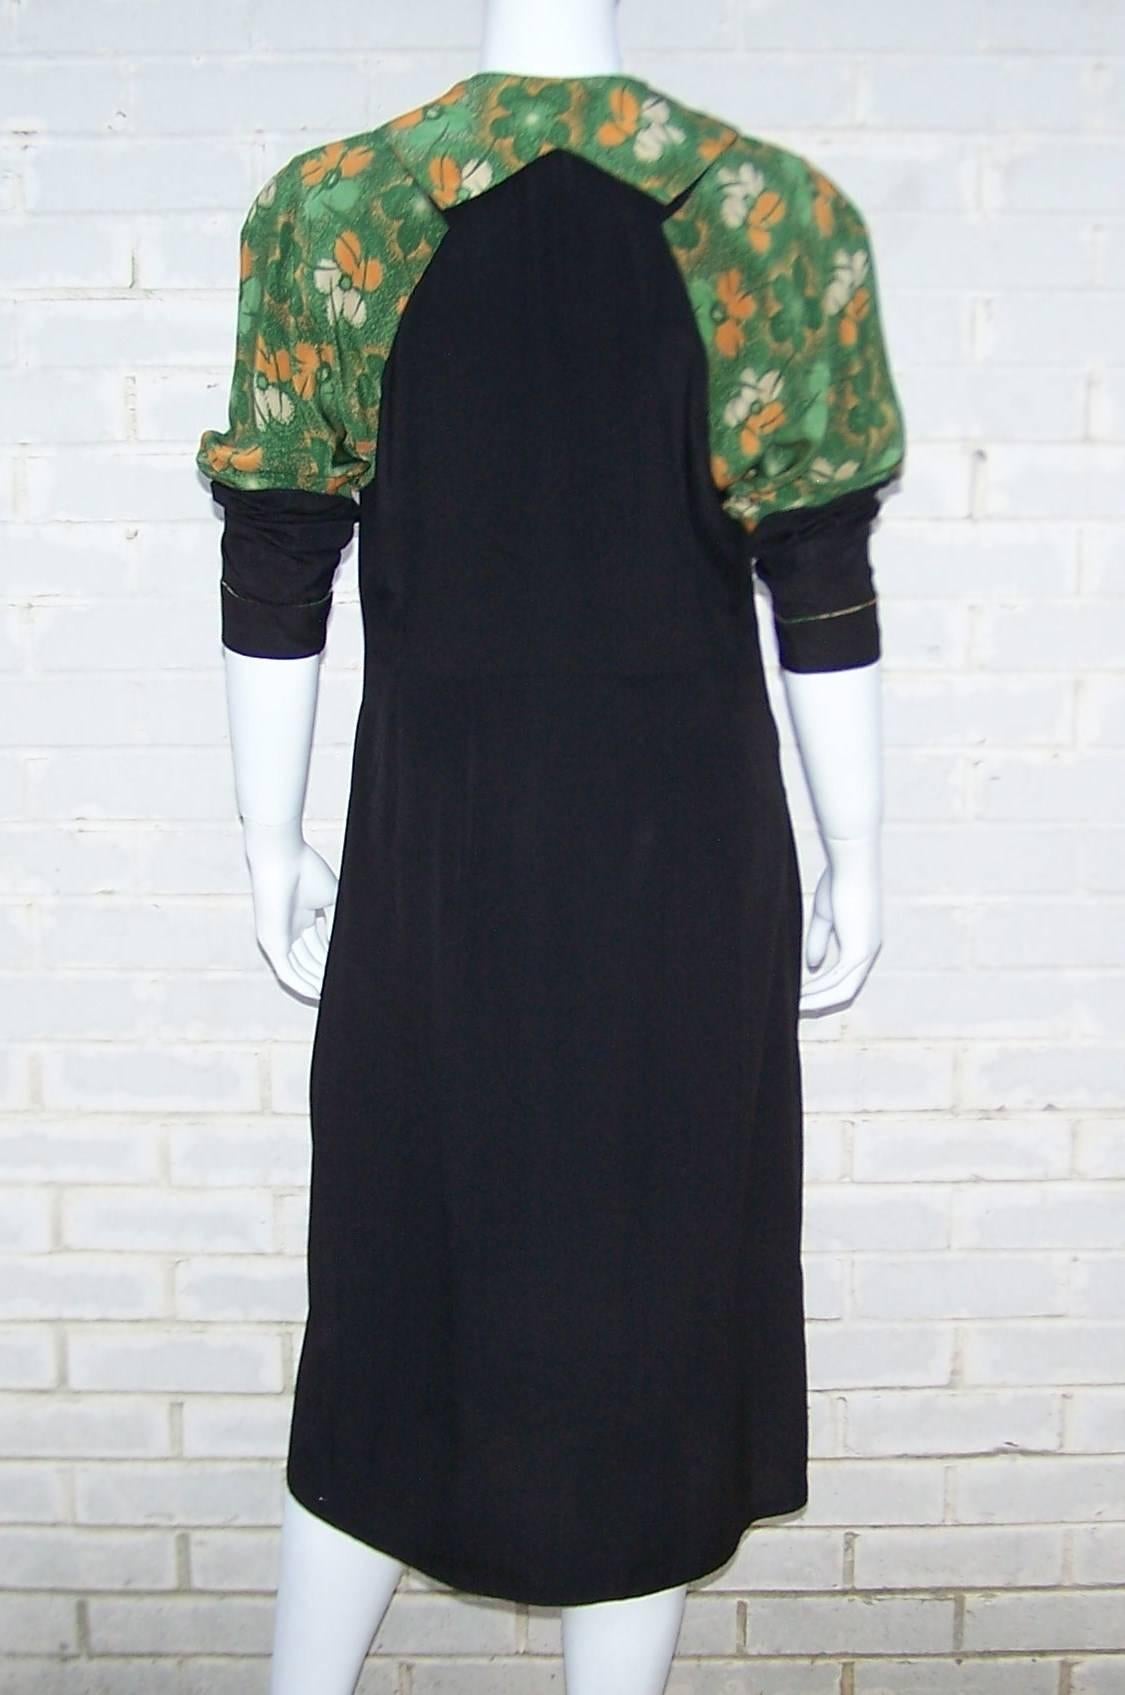 Women's 1920's Black Day Dress With Green Floral Bodice & Intricate Pin Tucking